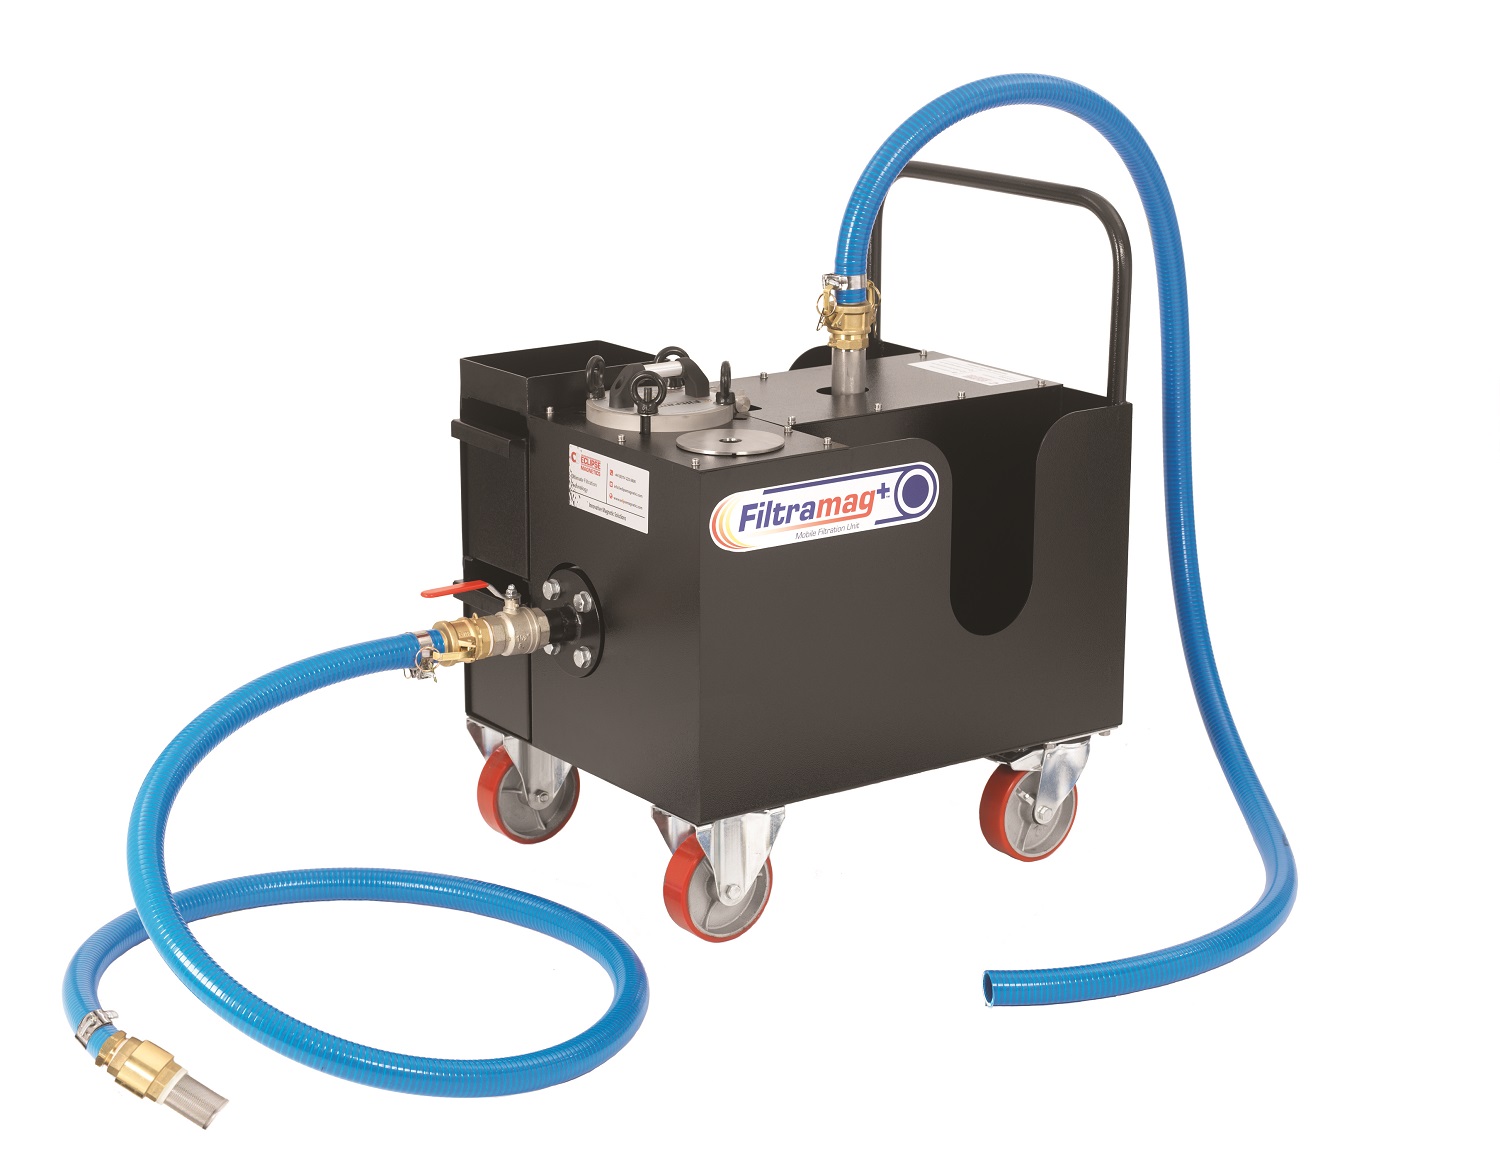 The FiltraMag+ mobile unit is an off-line filtration system designed for cleaning oils and coolants.